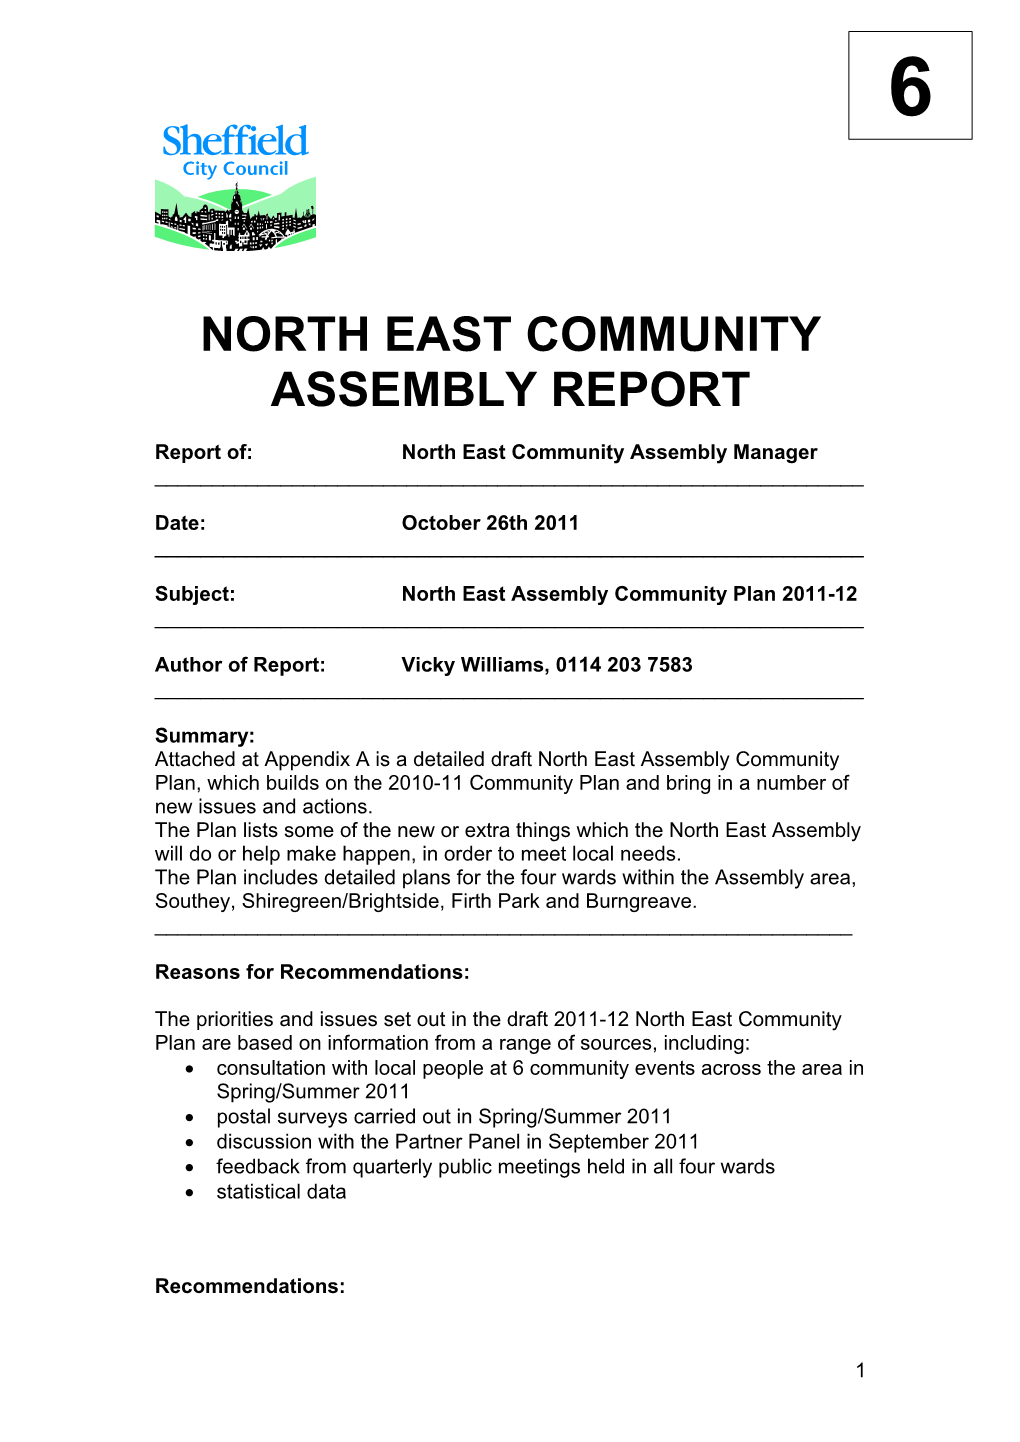 North East Community Assembly Report